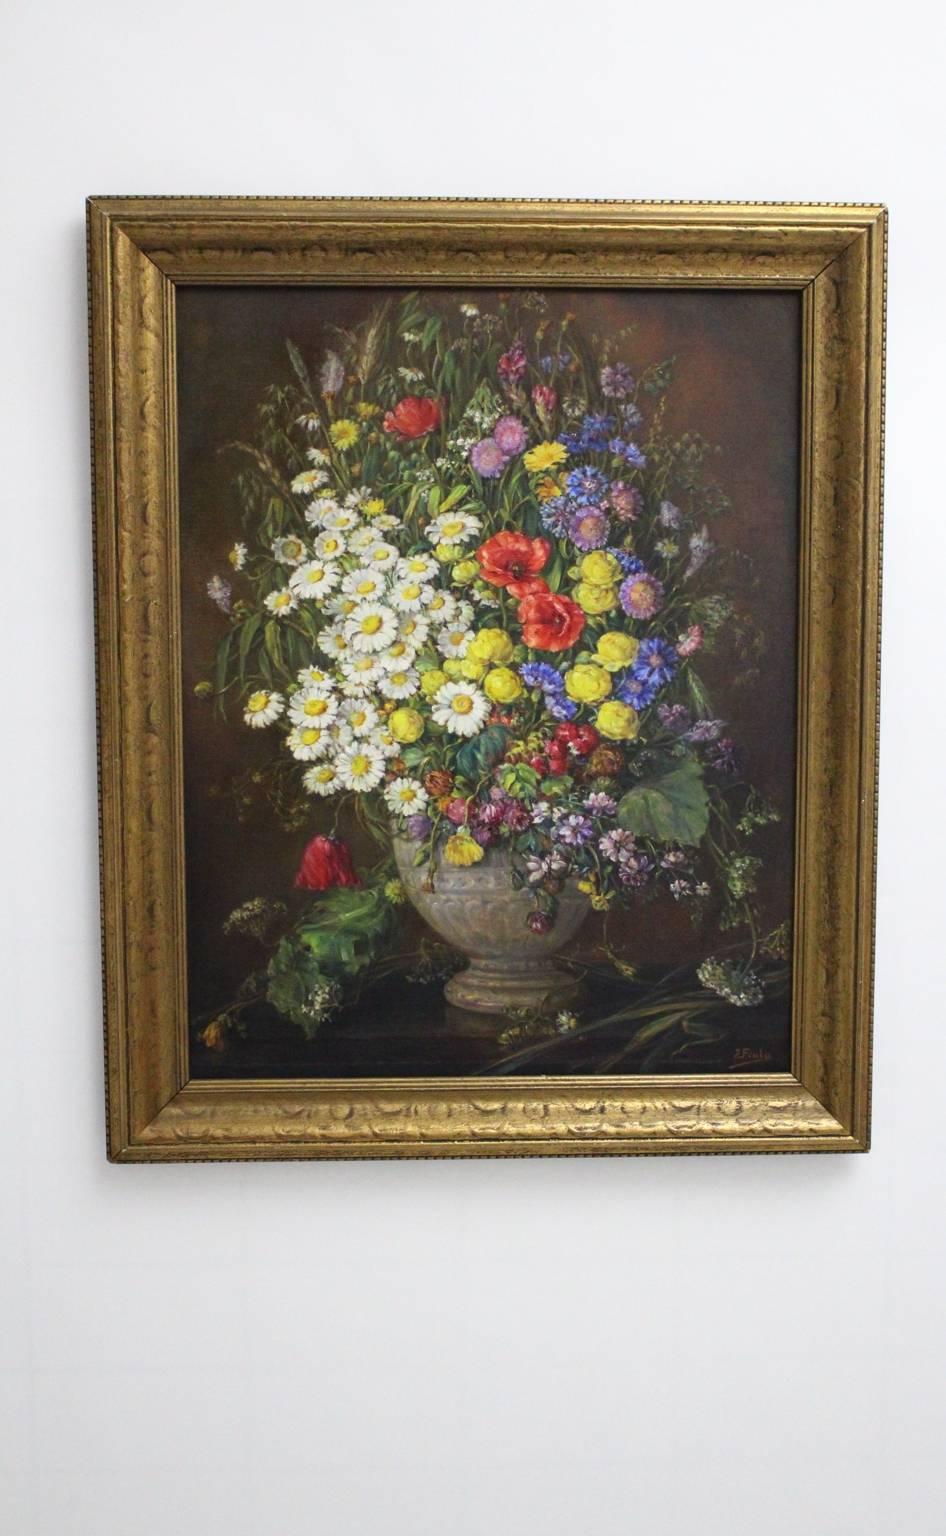 Art Deco Era Oil on Canvas Painting Wildflowers by Emil Fiala Vienna, 1930s For Sale 1